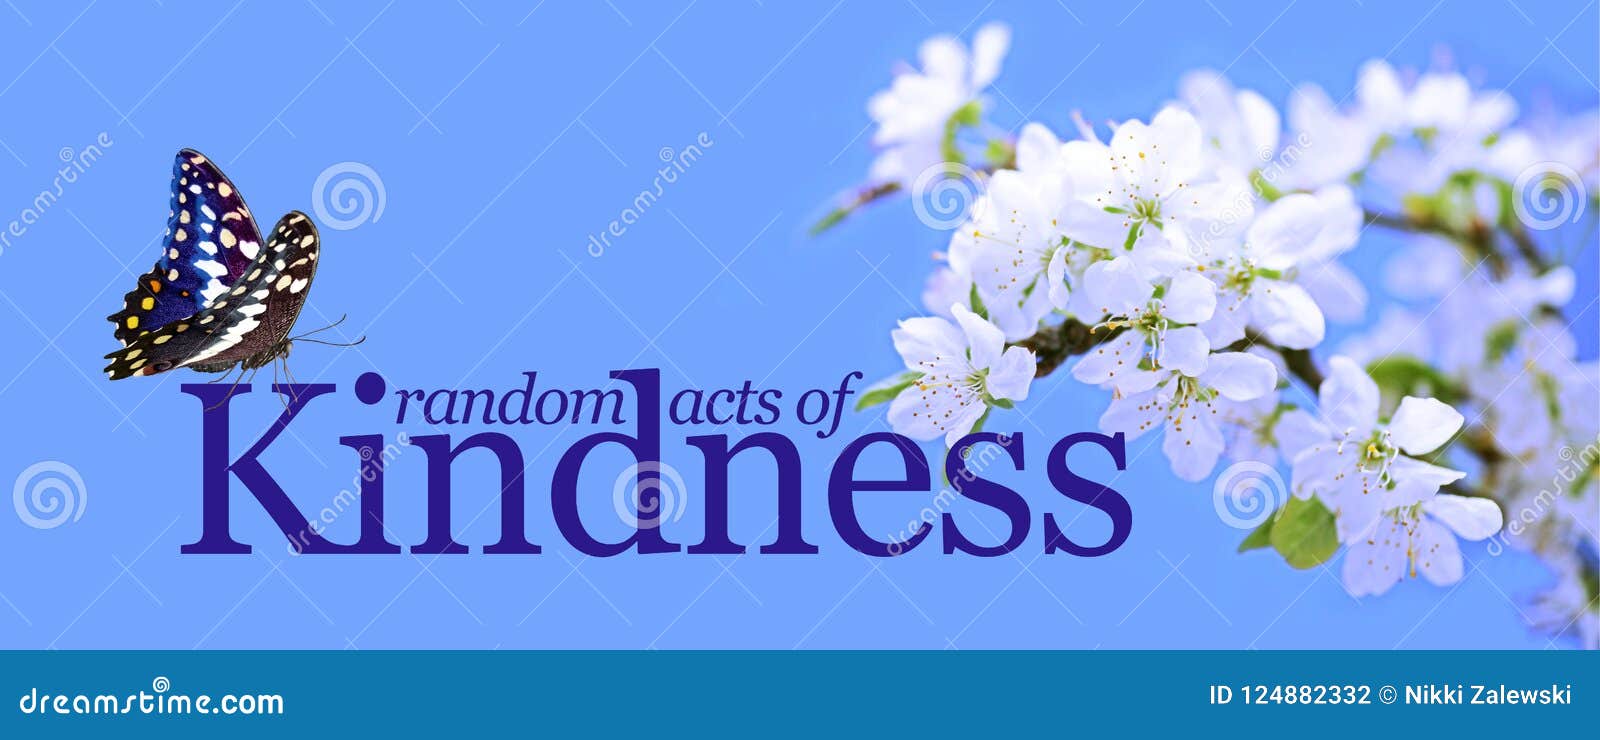 random acts of kindness butterfly background